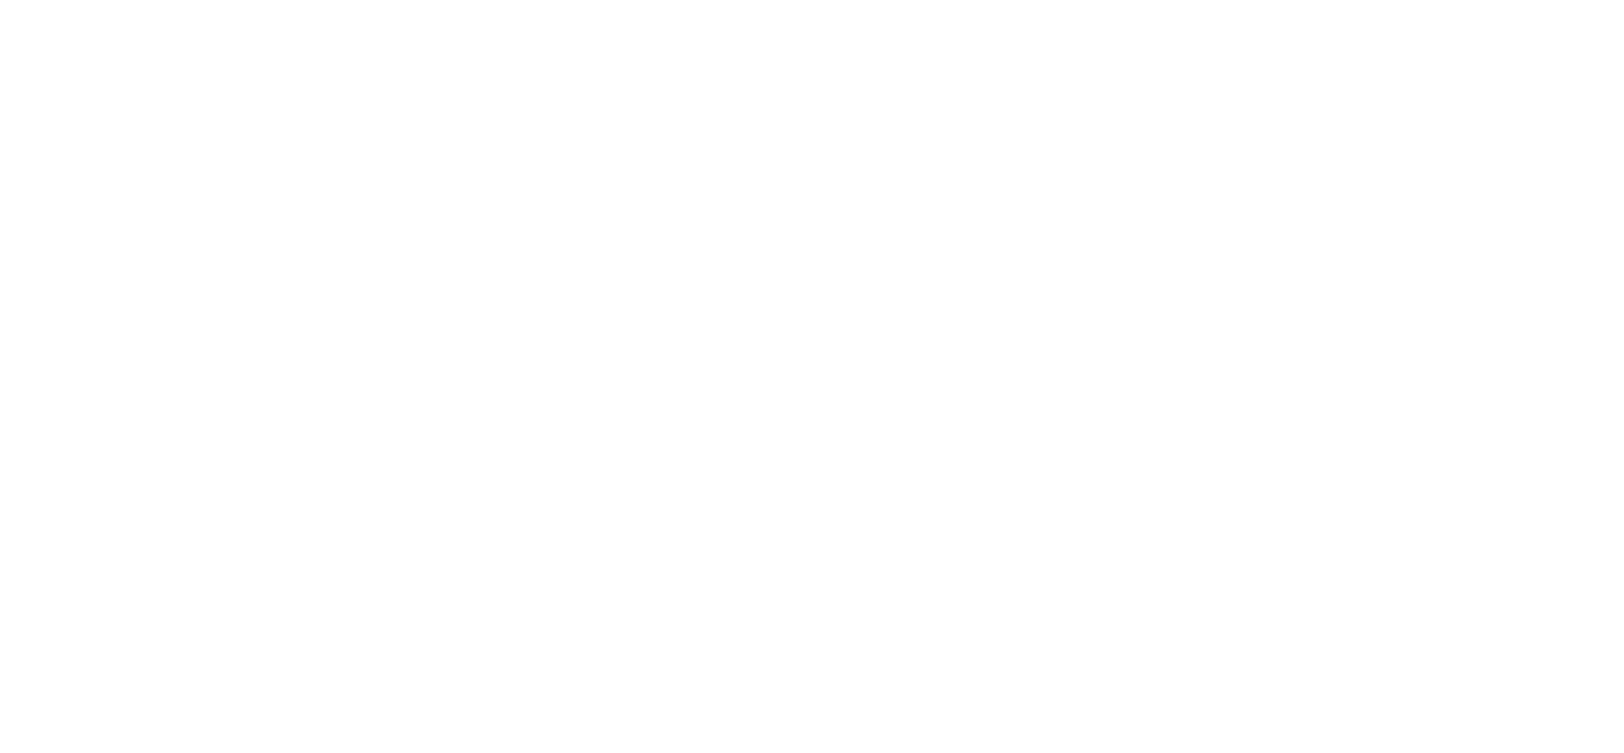 Primary Health Properties logo large for dark backgrounds (transparent PNG)